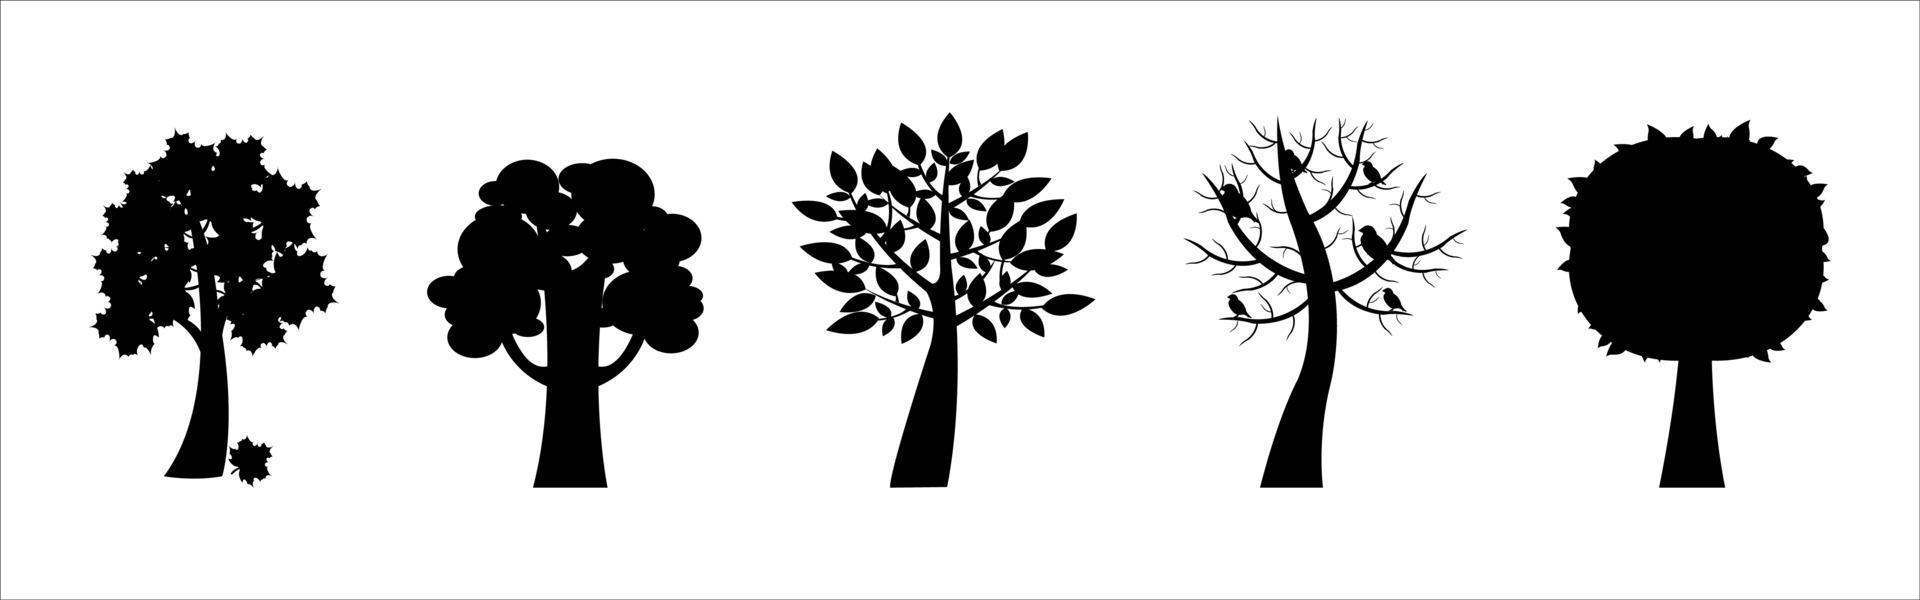 Detailed tree silhouettes vector